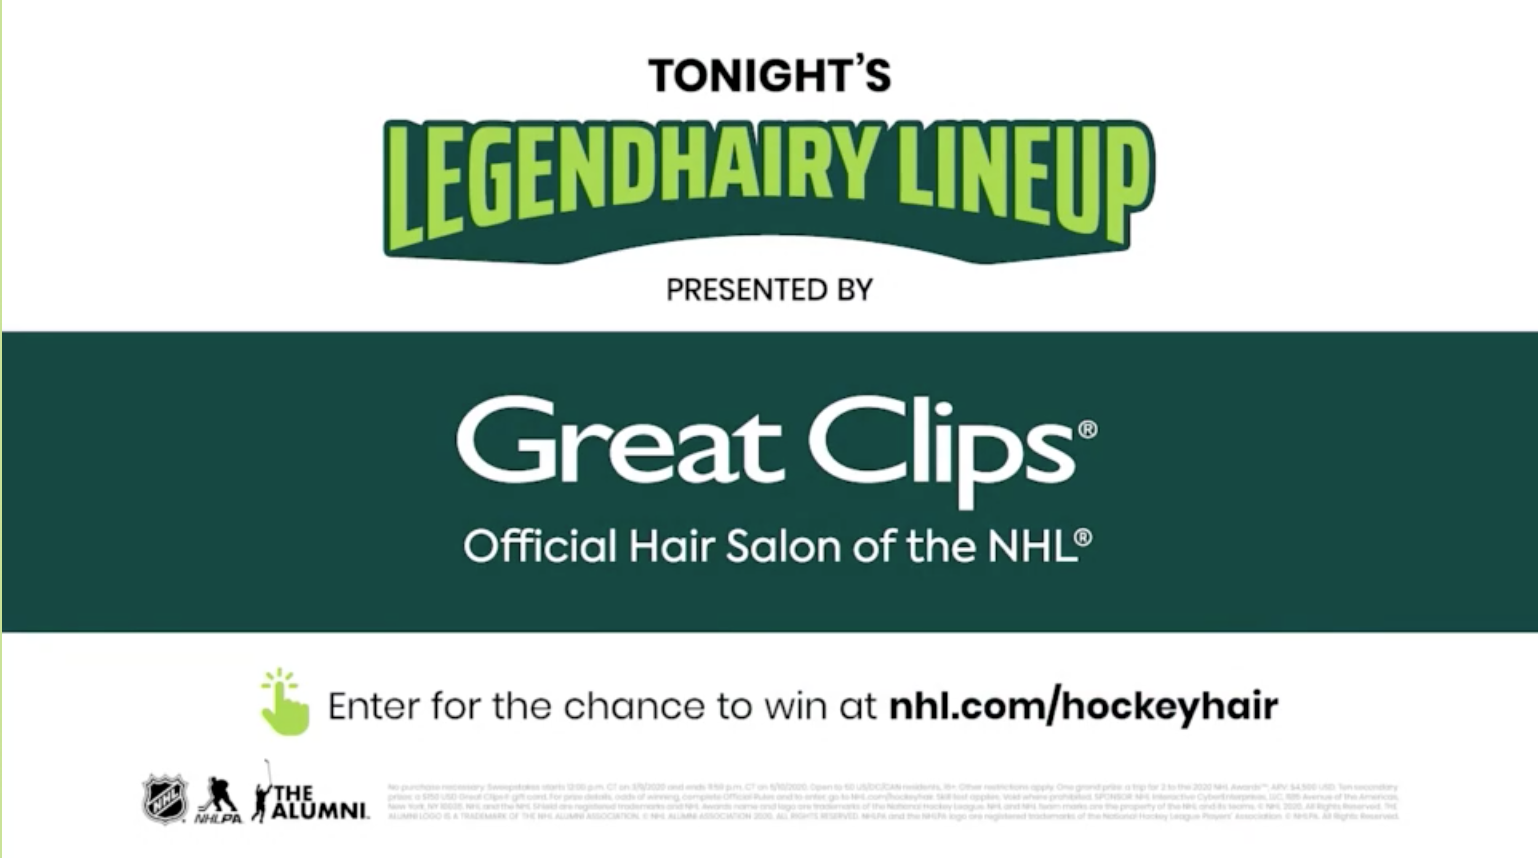 Great Clips and the NHL partner marketing campaign